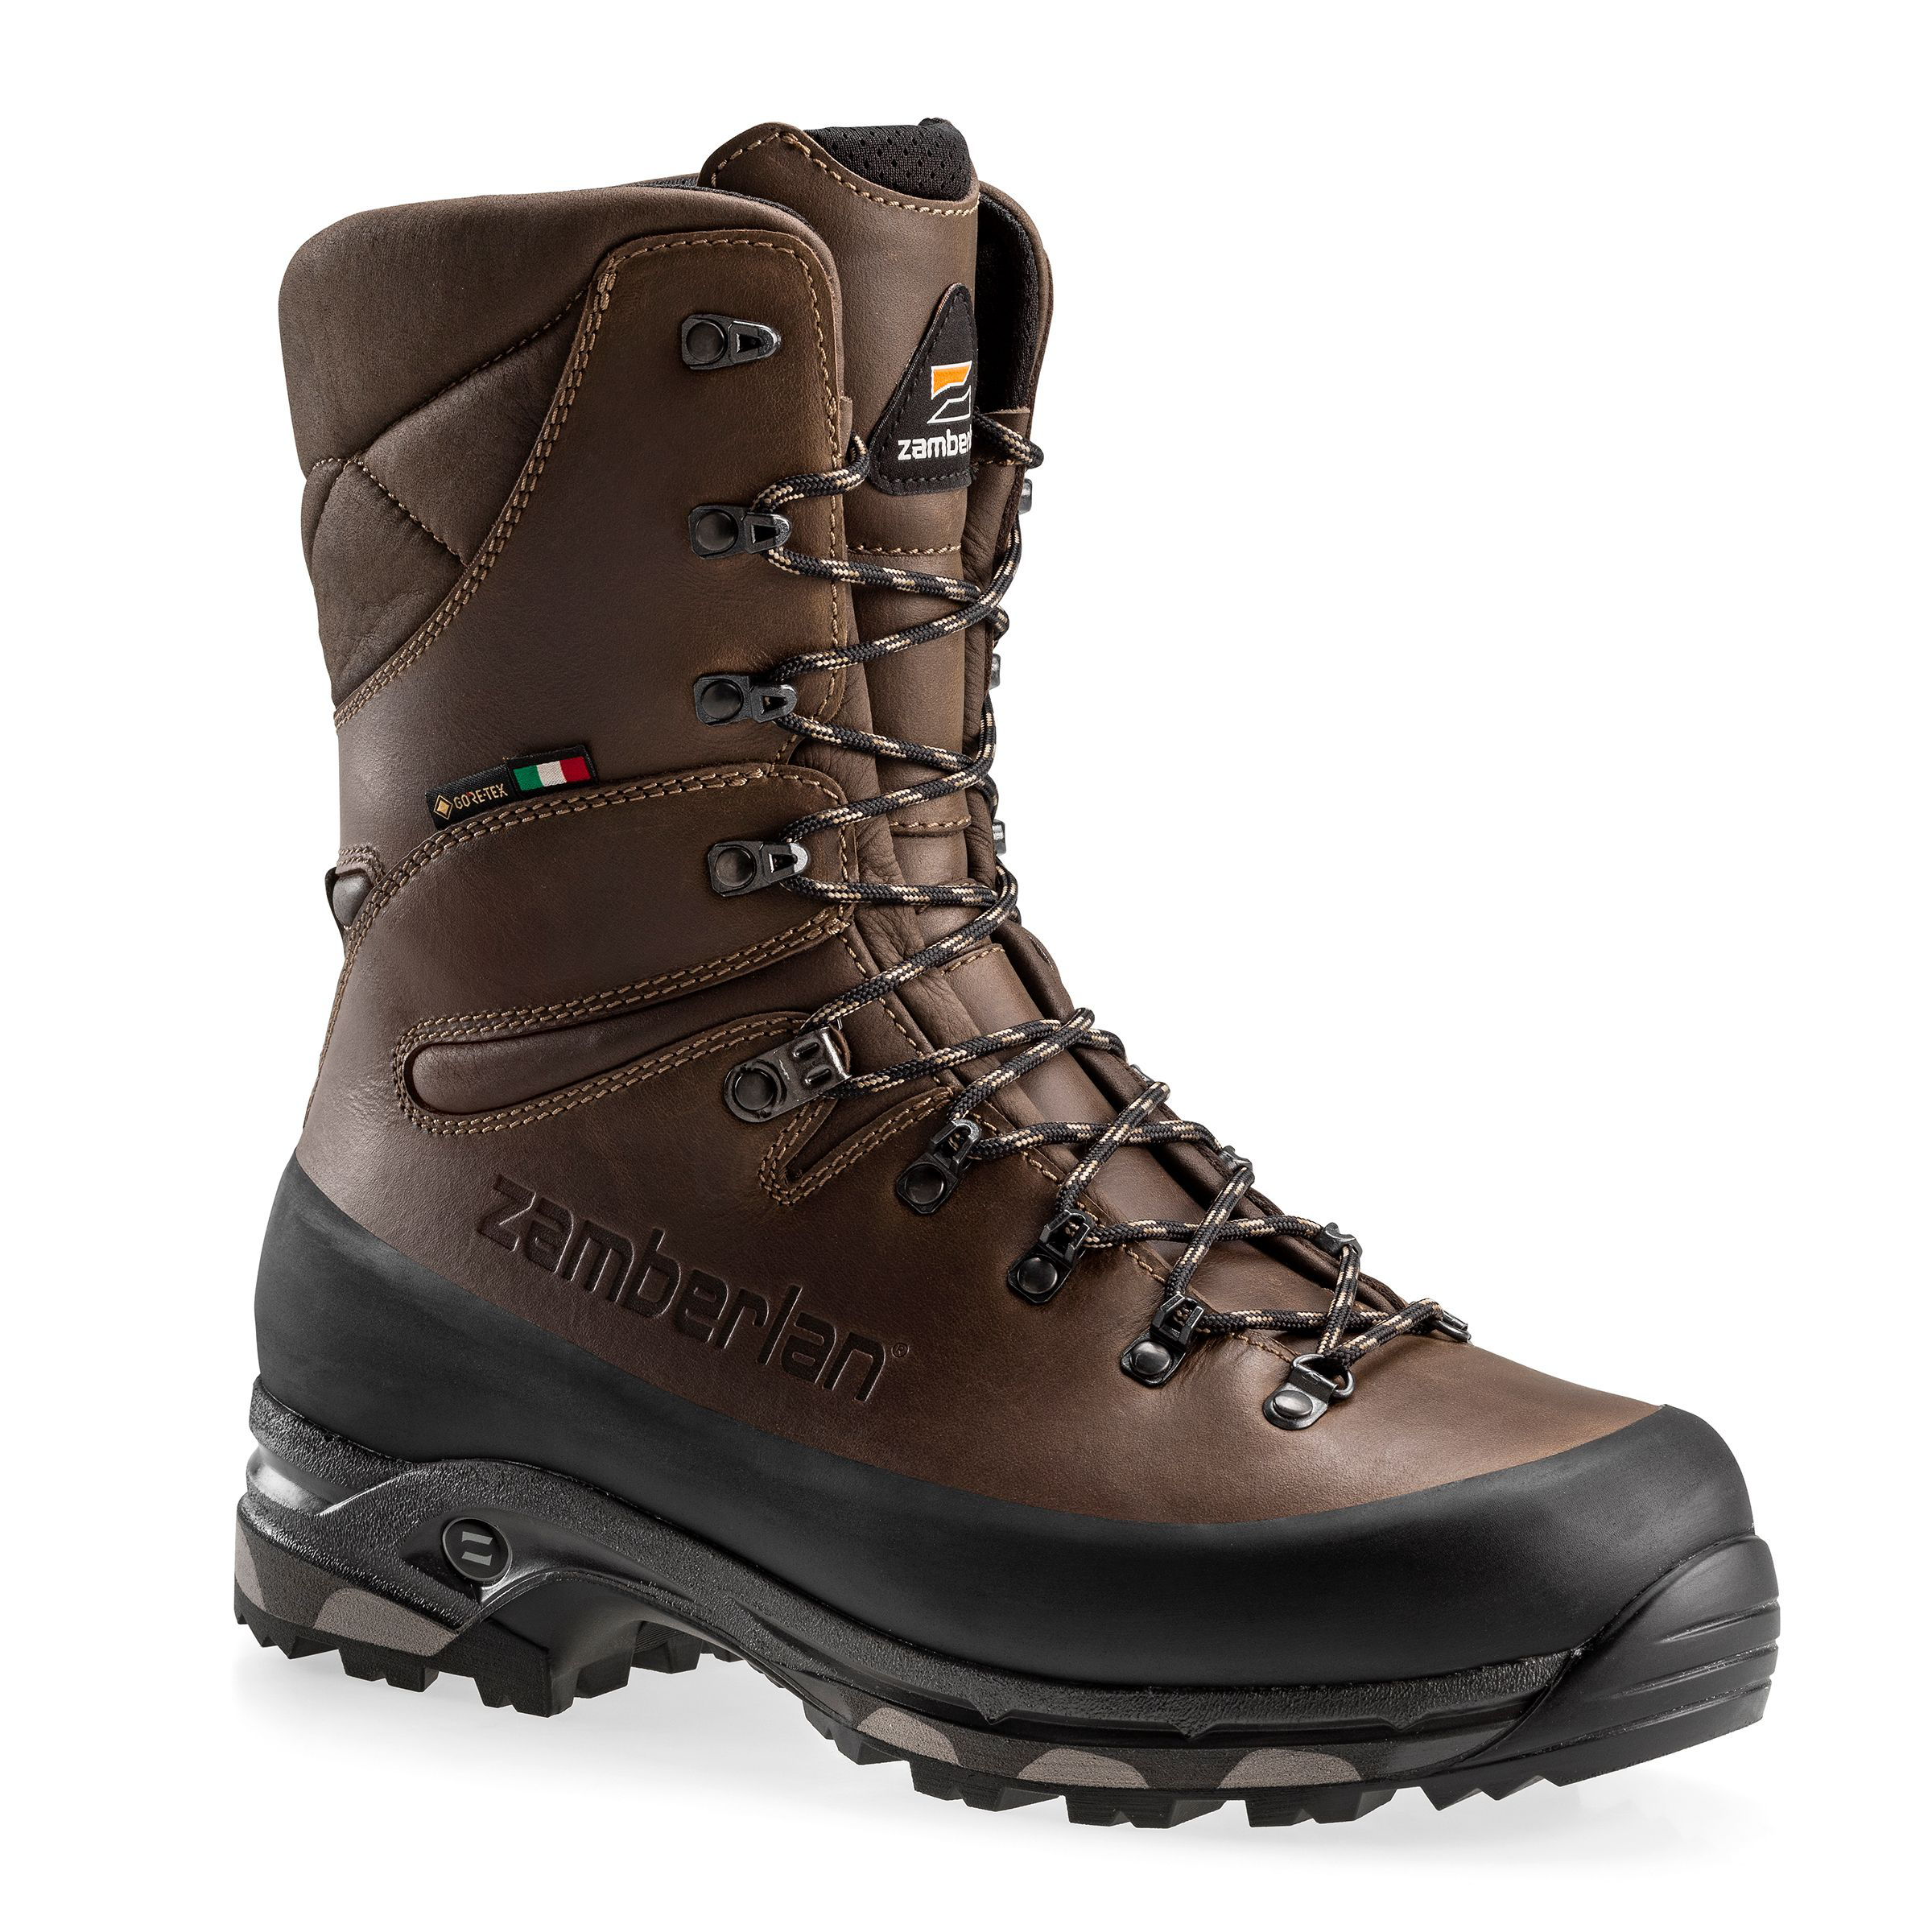 Zamberlan 1005 Hunter Pro GTX RR WL GORE-TEX Insulated Hunting Boots for Men - Brown - 10W